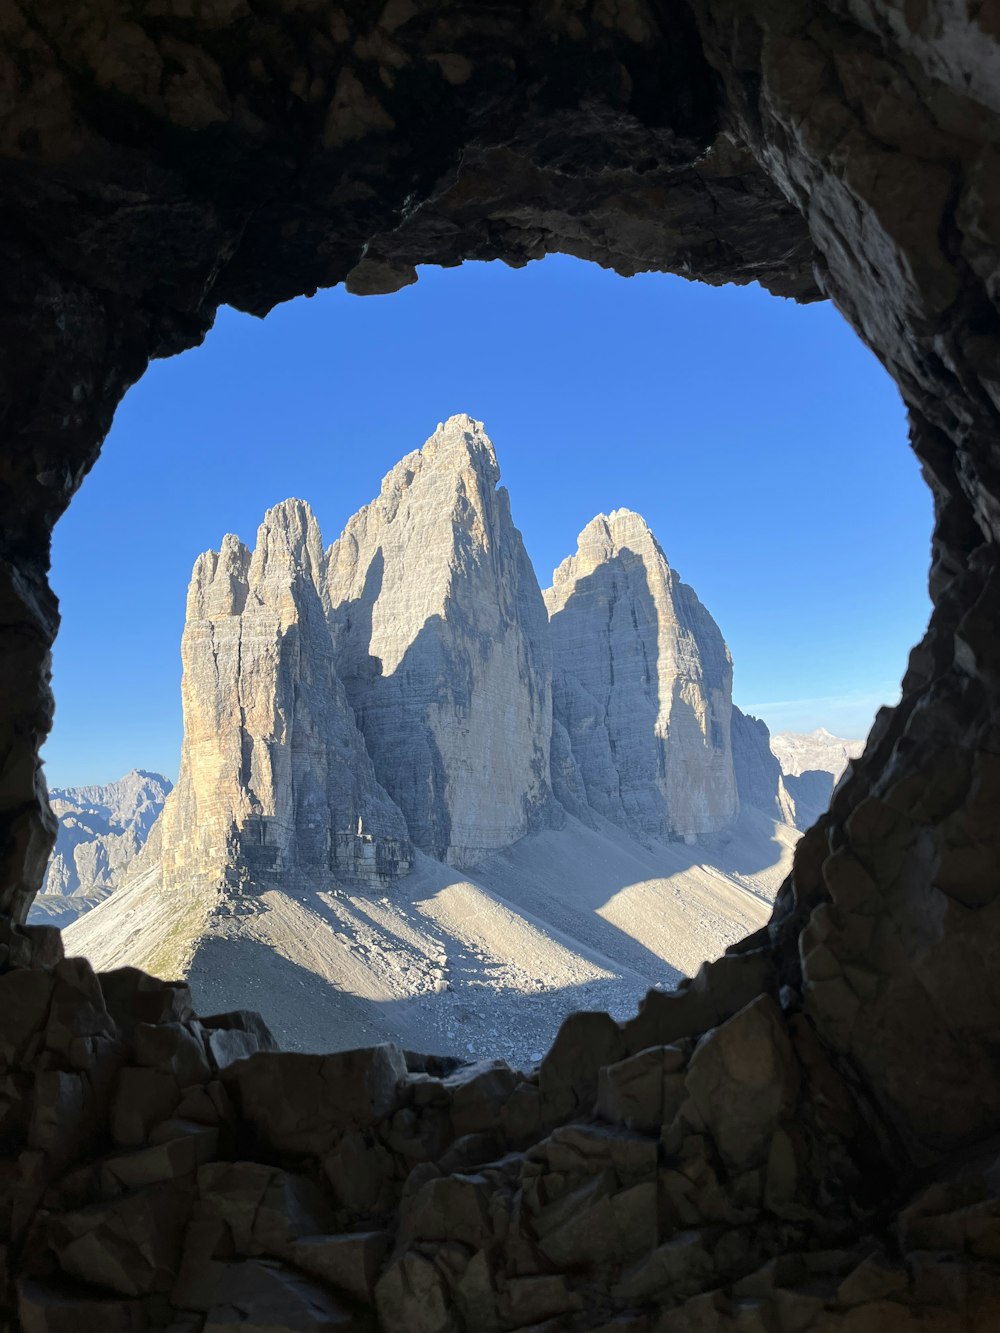 a view of a mountain range through a hole in a rock wall